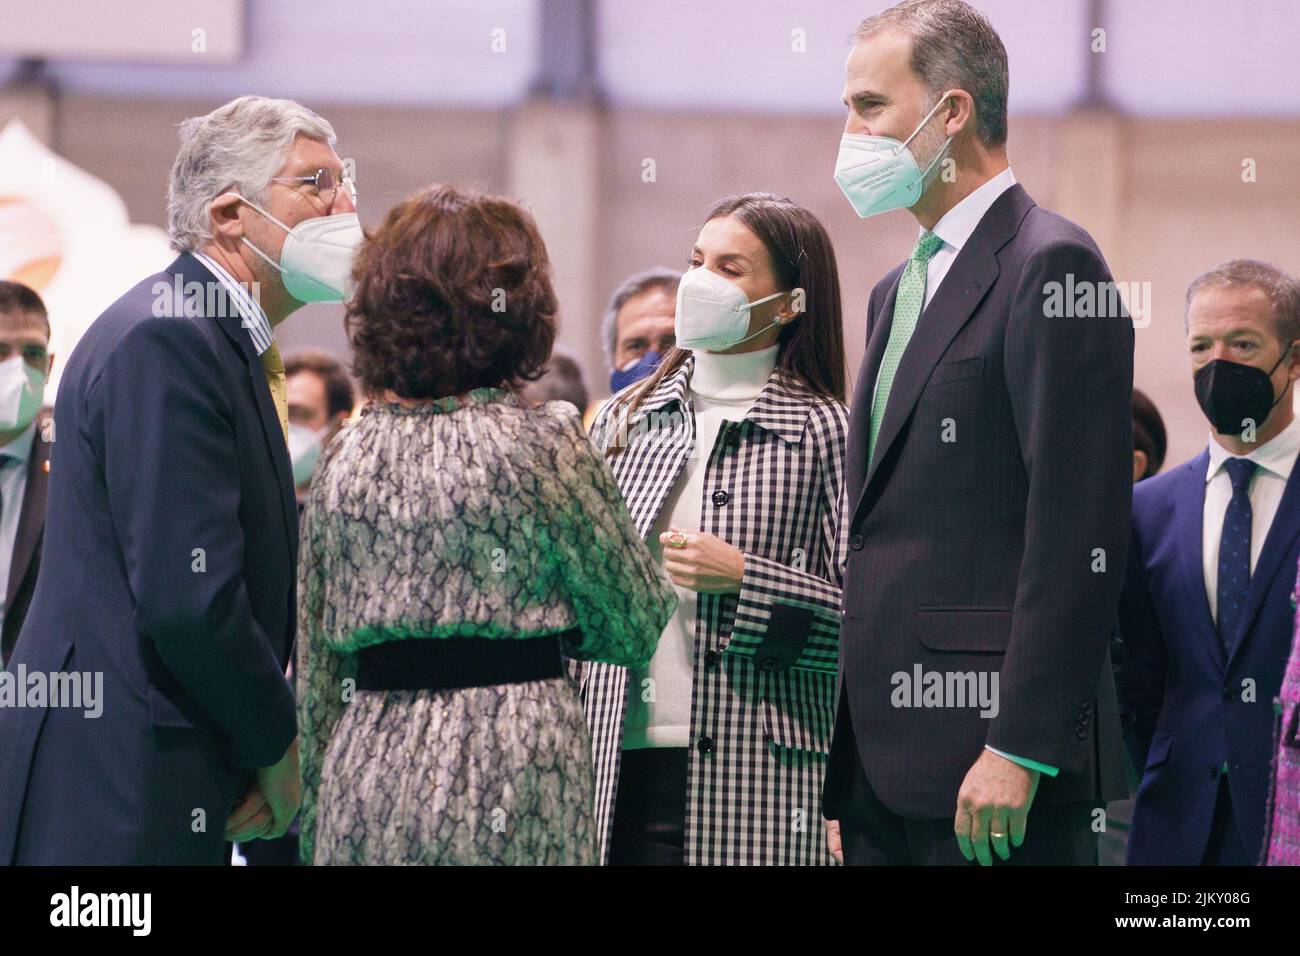 Queen Letizia of Spain and King Felipe VI of Spain attend FITUR Tourism Fair 2022 opening at Ifema on January 19, 2022 in Madrid, Spain Featuring: King Felipe VI of Spain, Queen Letizia of Spain Where: Madrid, Spain When: 19 Jan 2022 Credit: Oscar Gonzalez/WENN Stock Photo